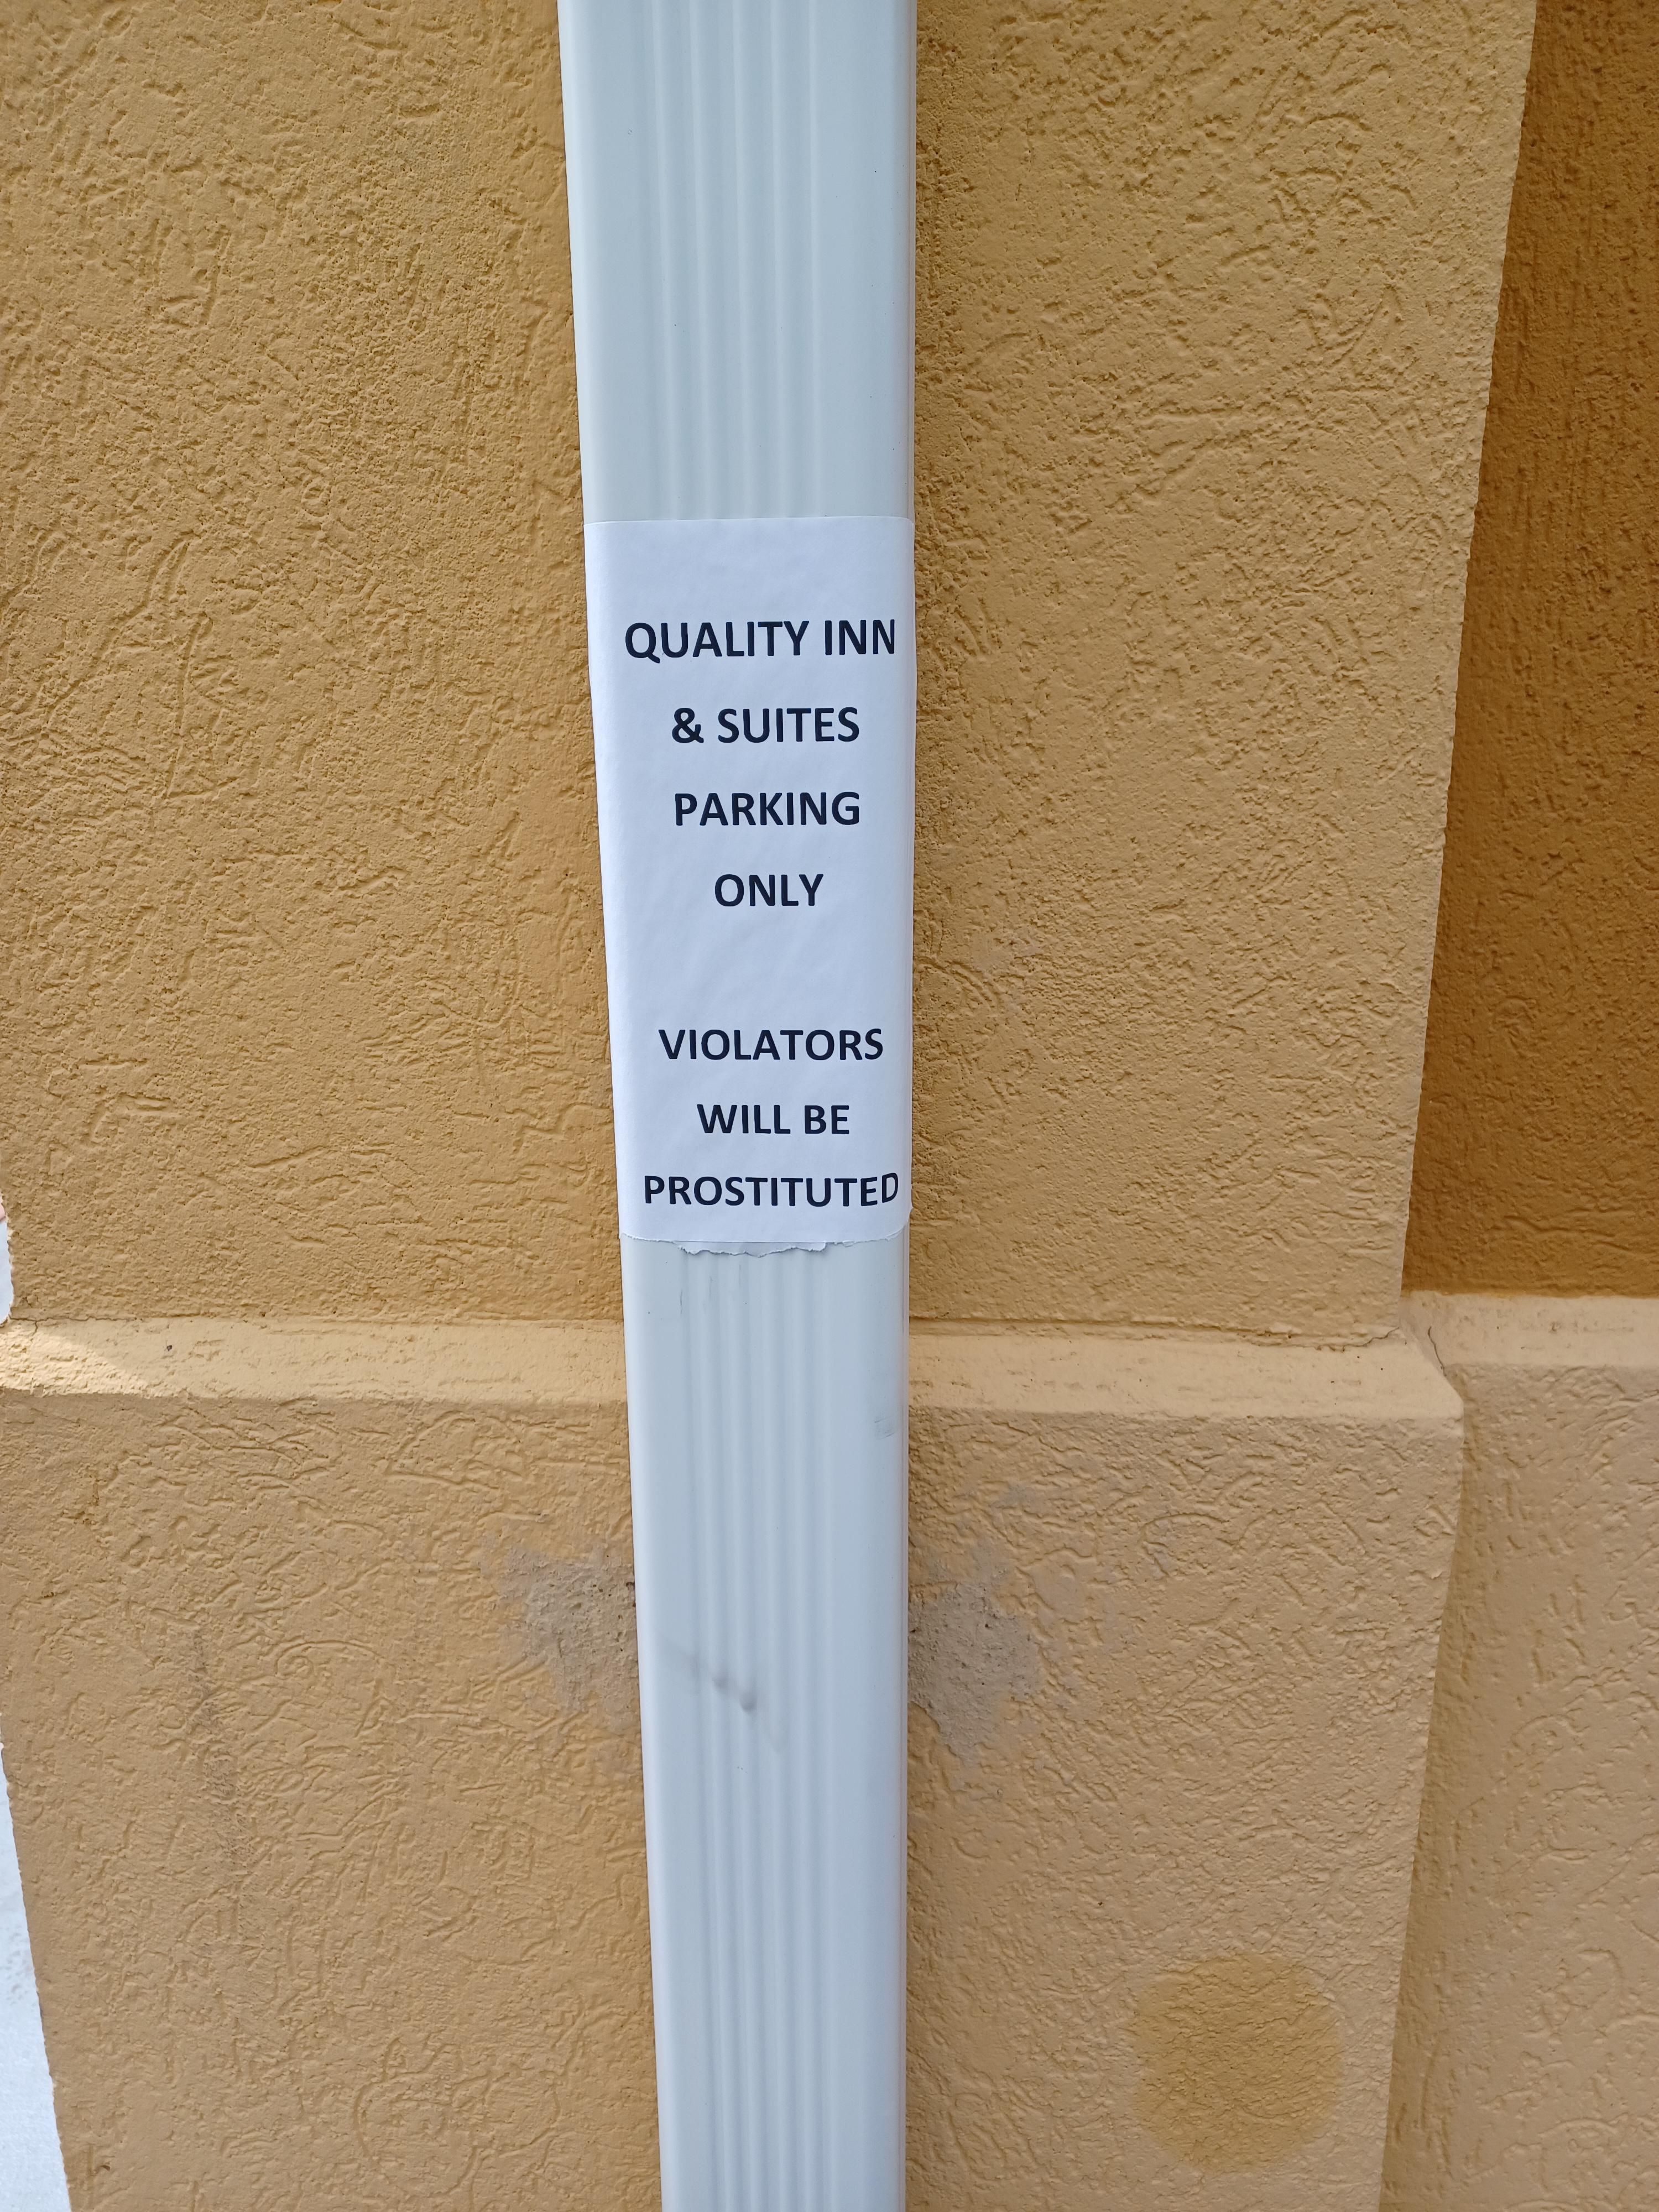 Quality Inn's solution to fines